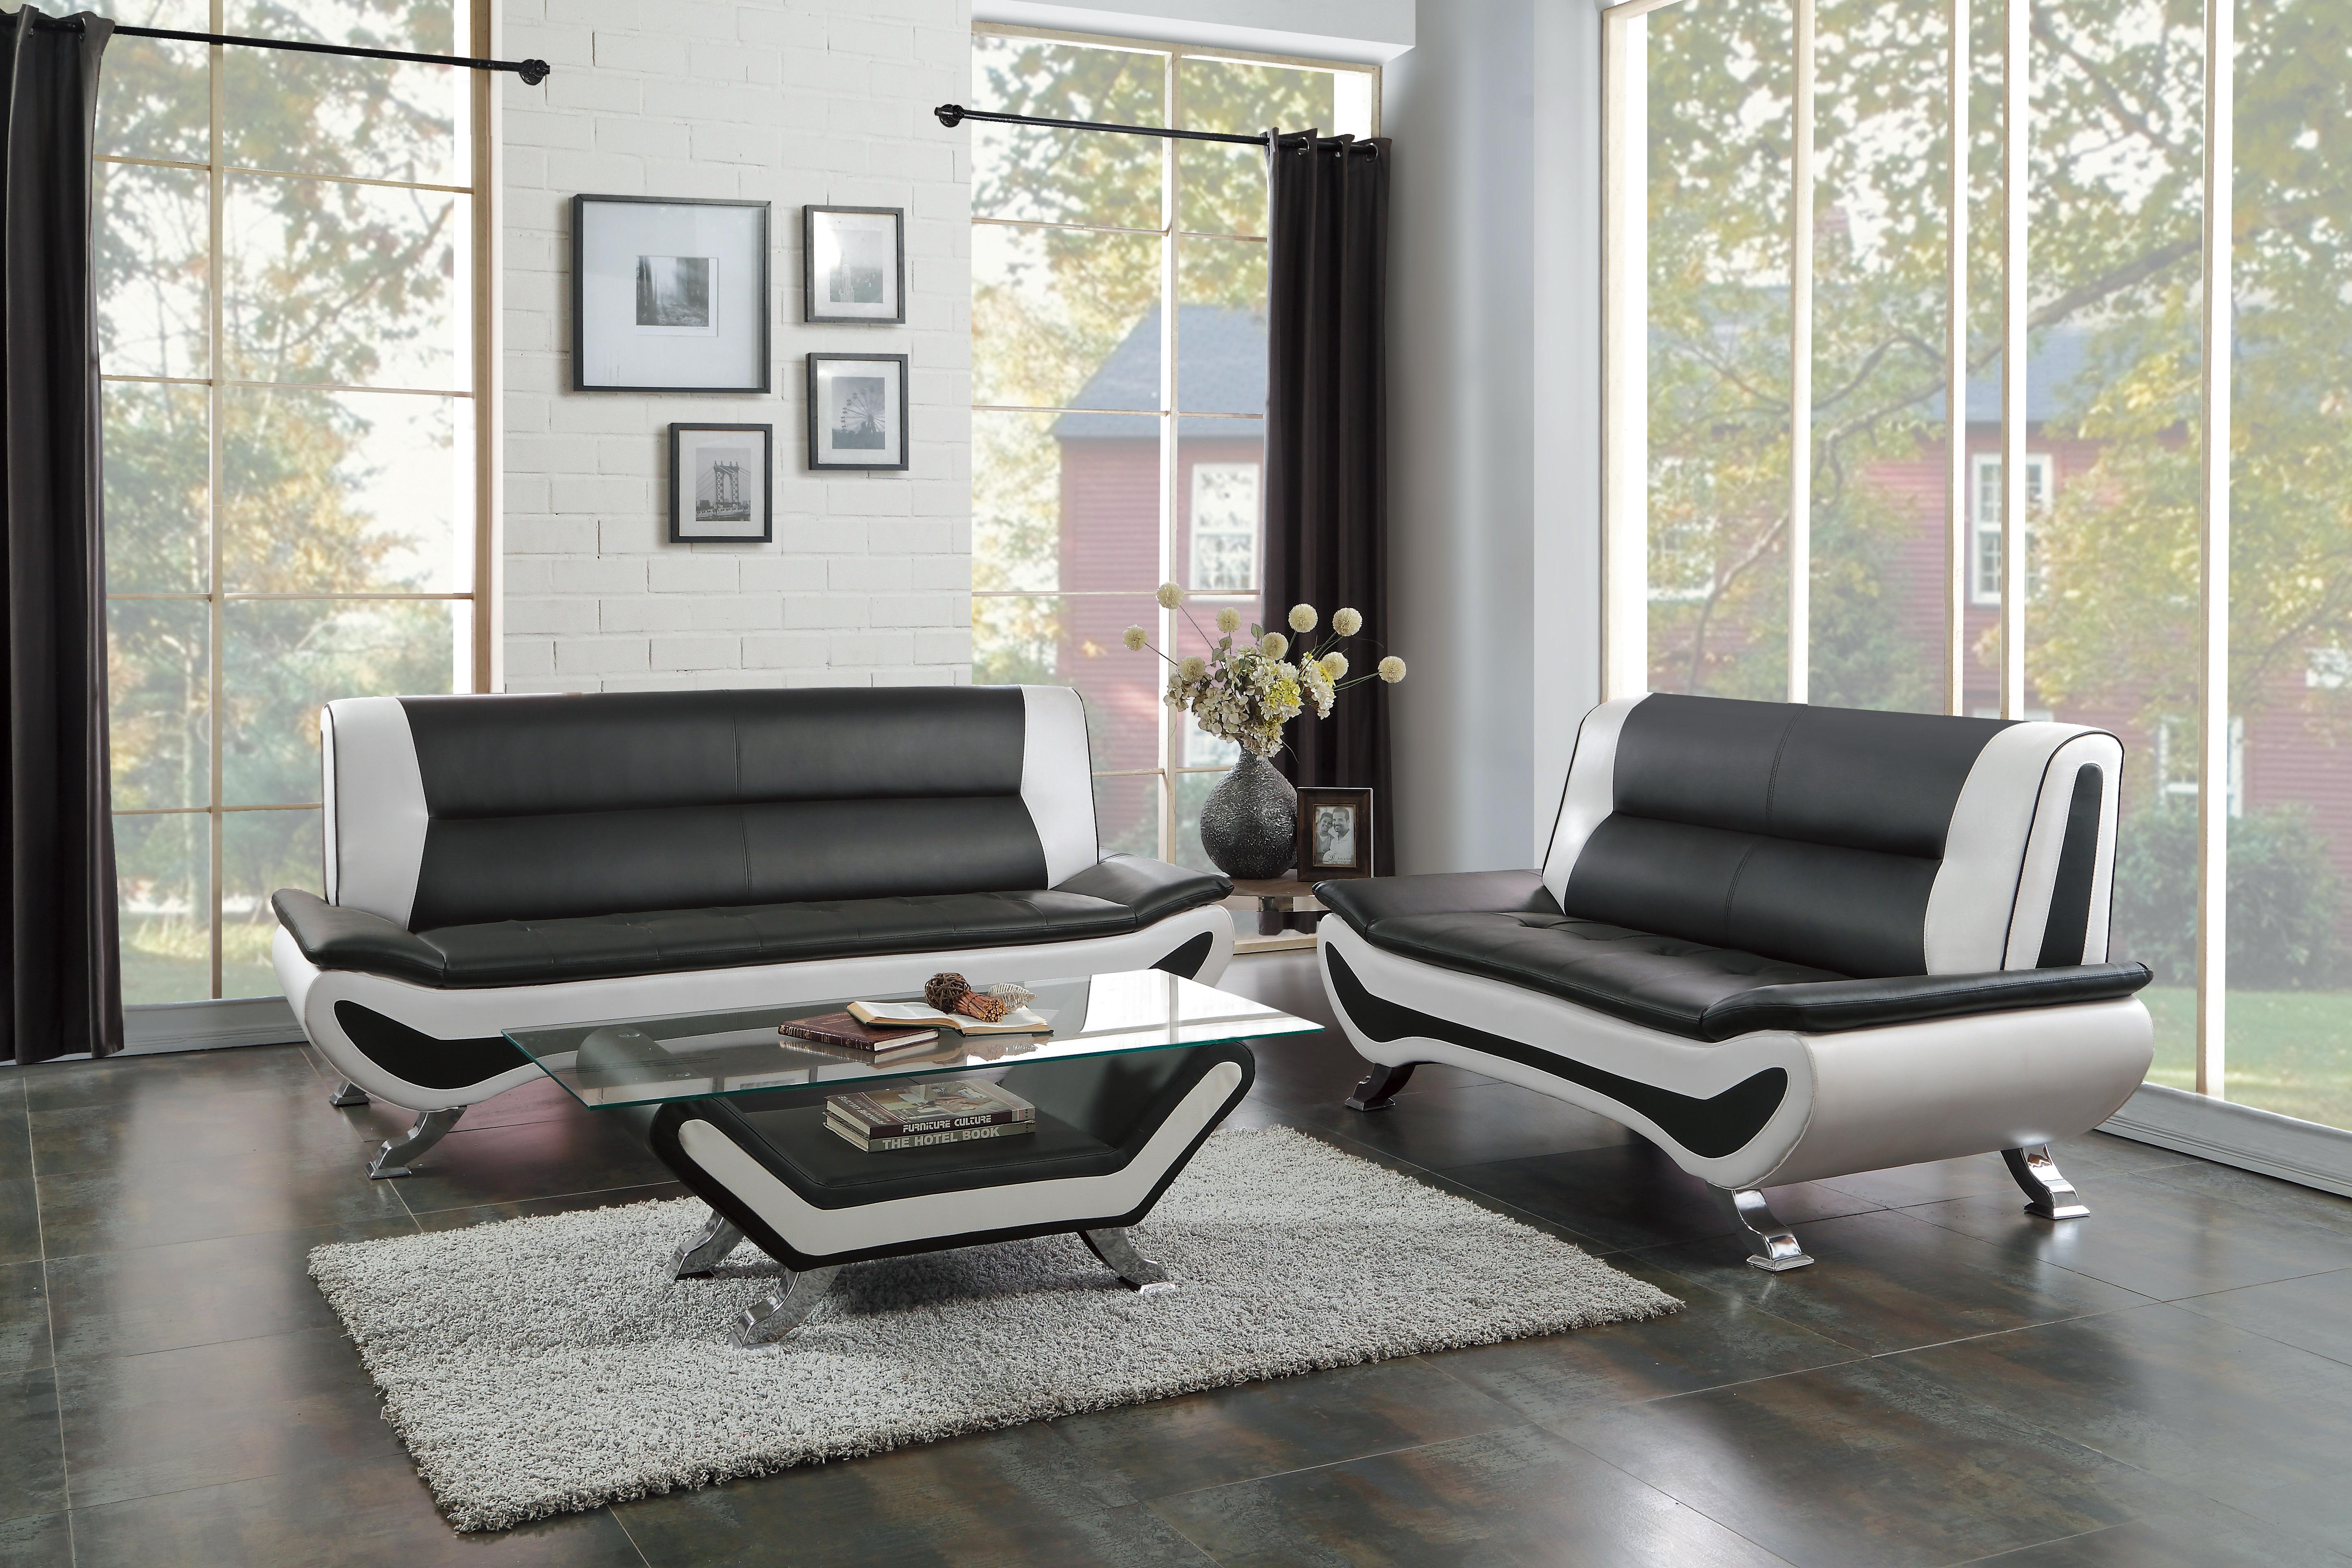 Contemporary Living Room Set 8219-2PC Veloce 8219-2PC in White, Black Faux Leather